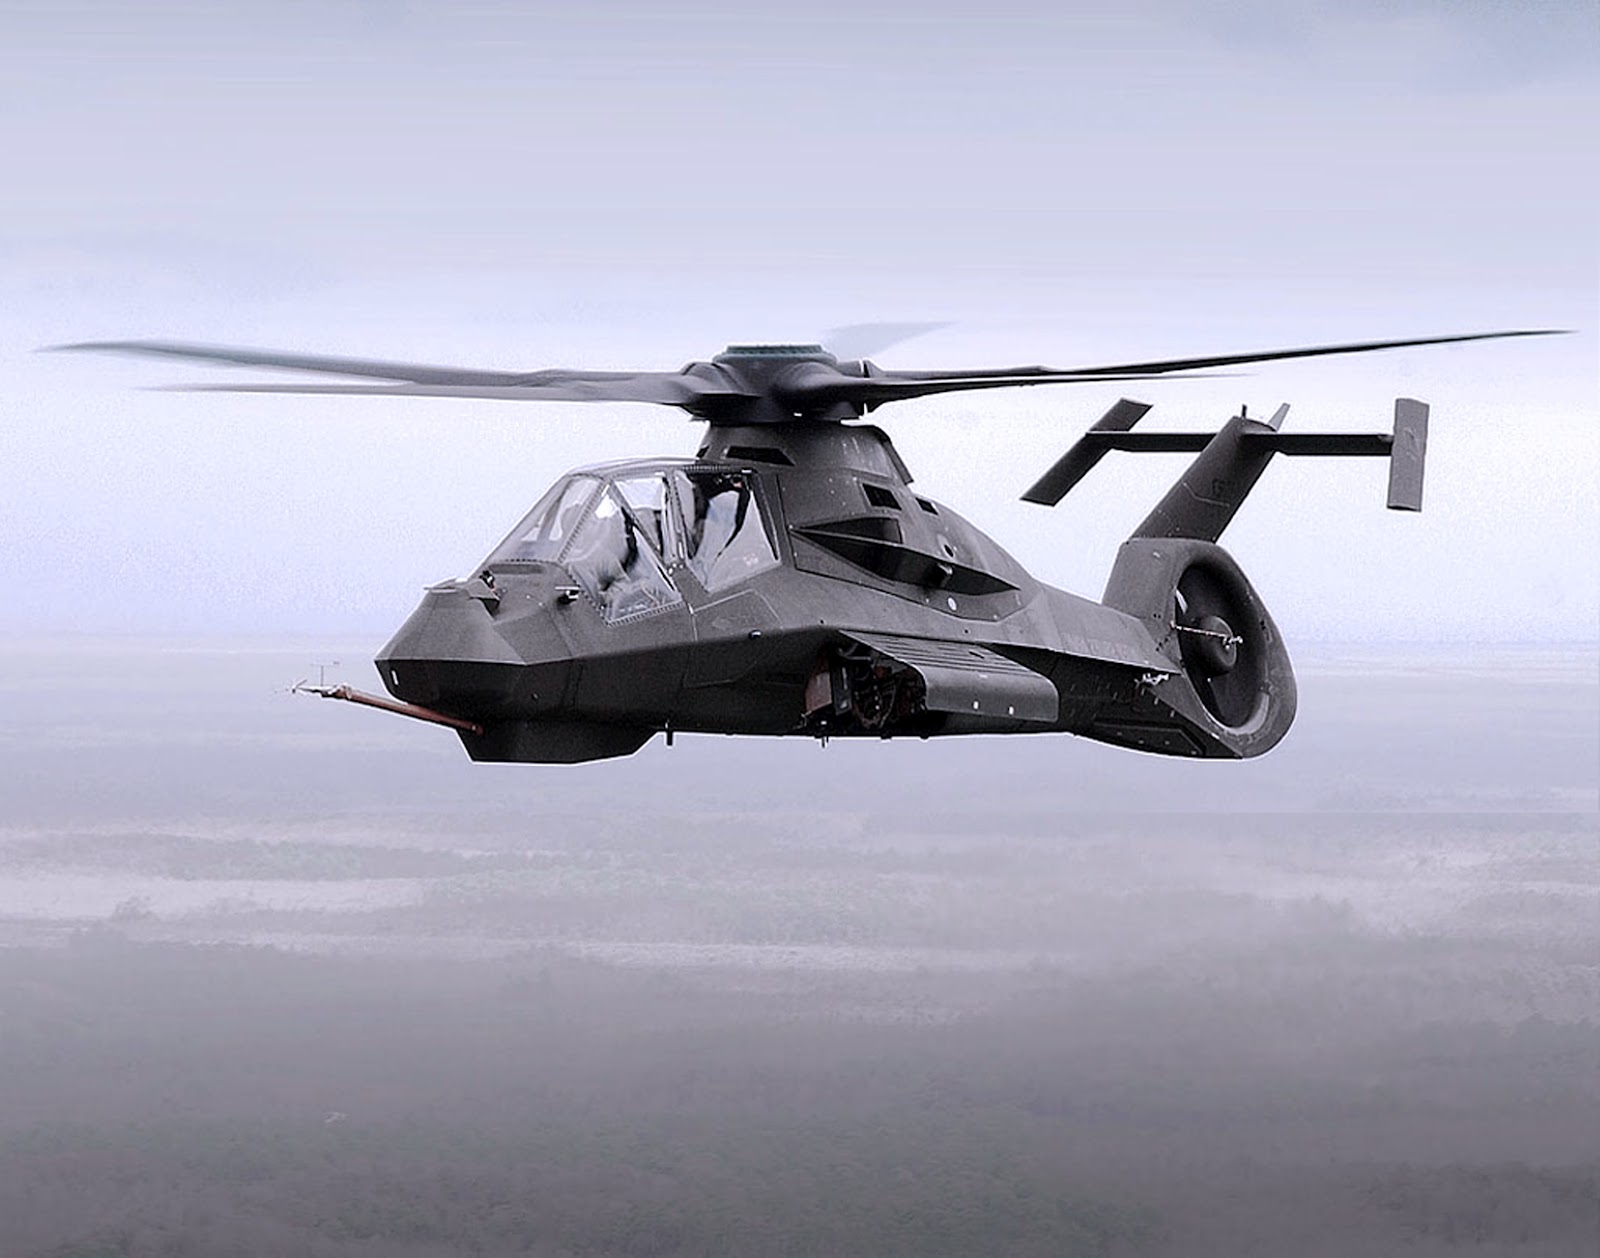 sci+fi+futuristic+americas+first+stealth+helicopter+us-RAH66+Comanche+stealth+helicopter+concept+vtol+craft.jpg